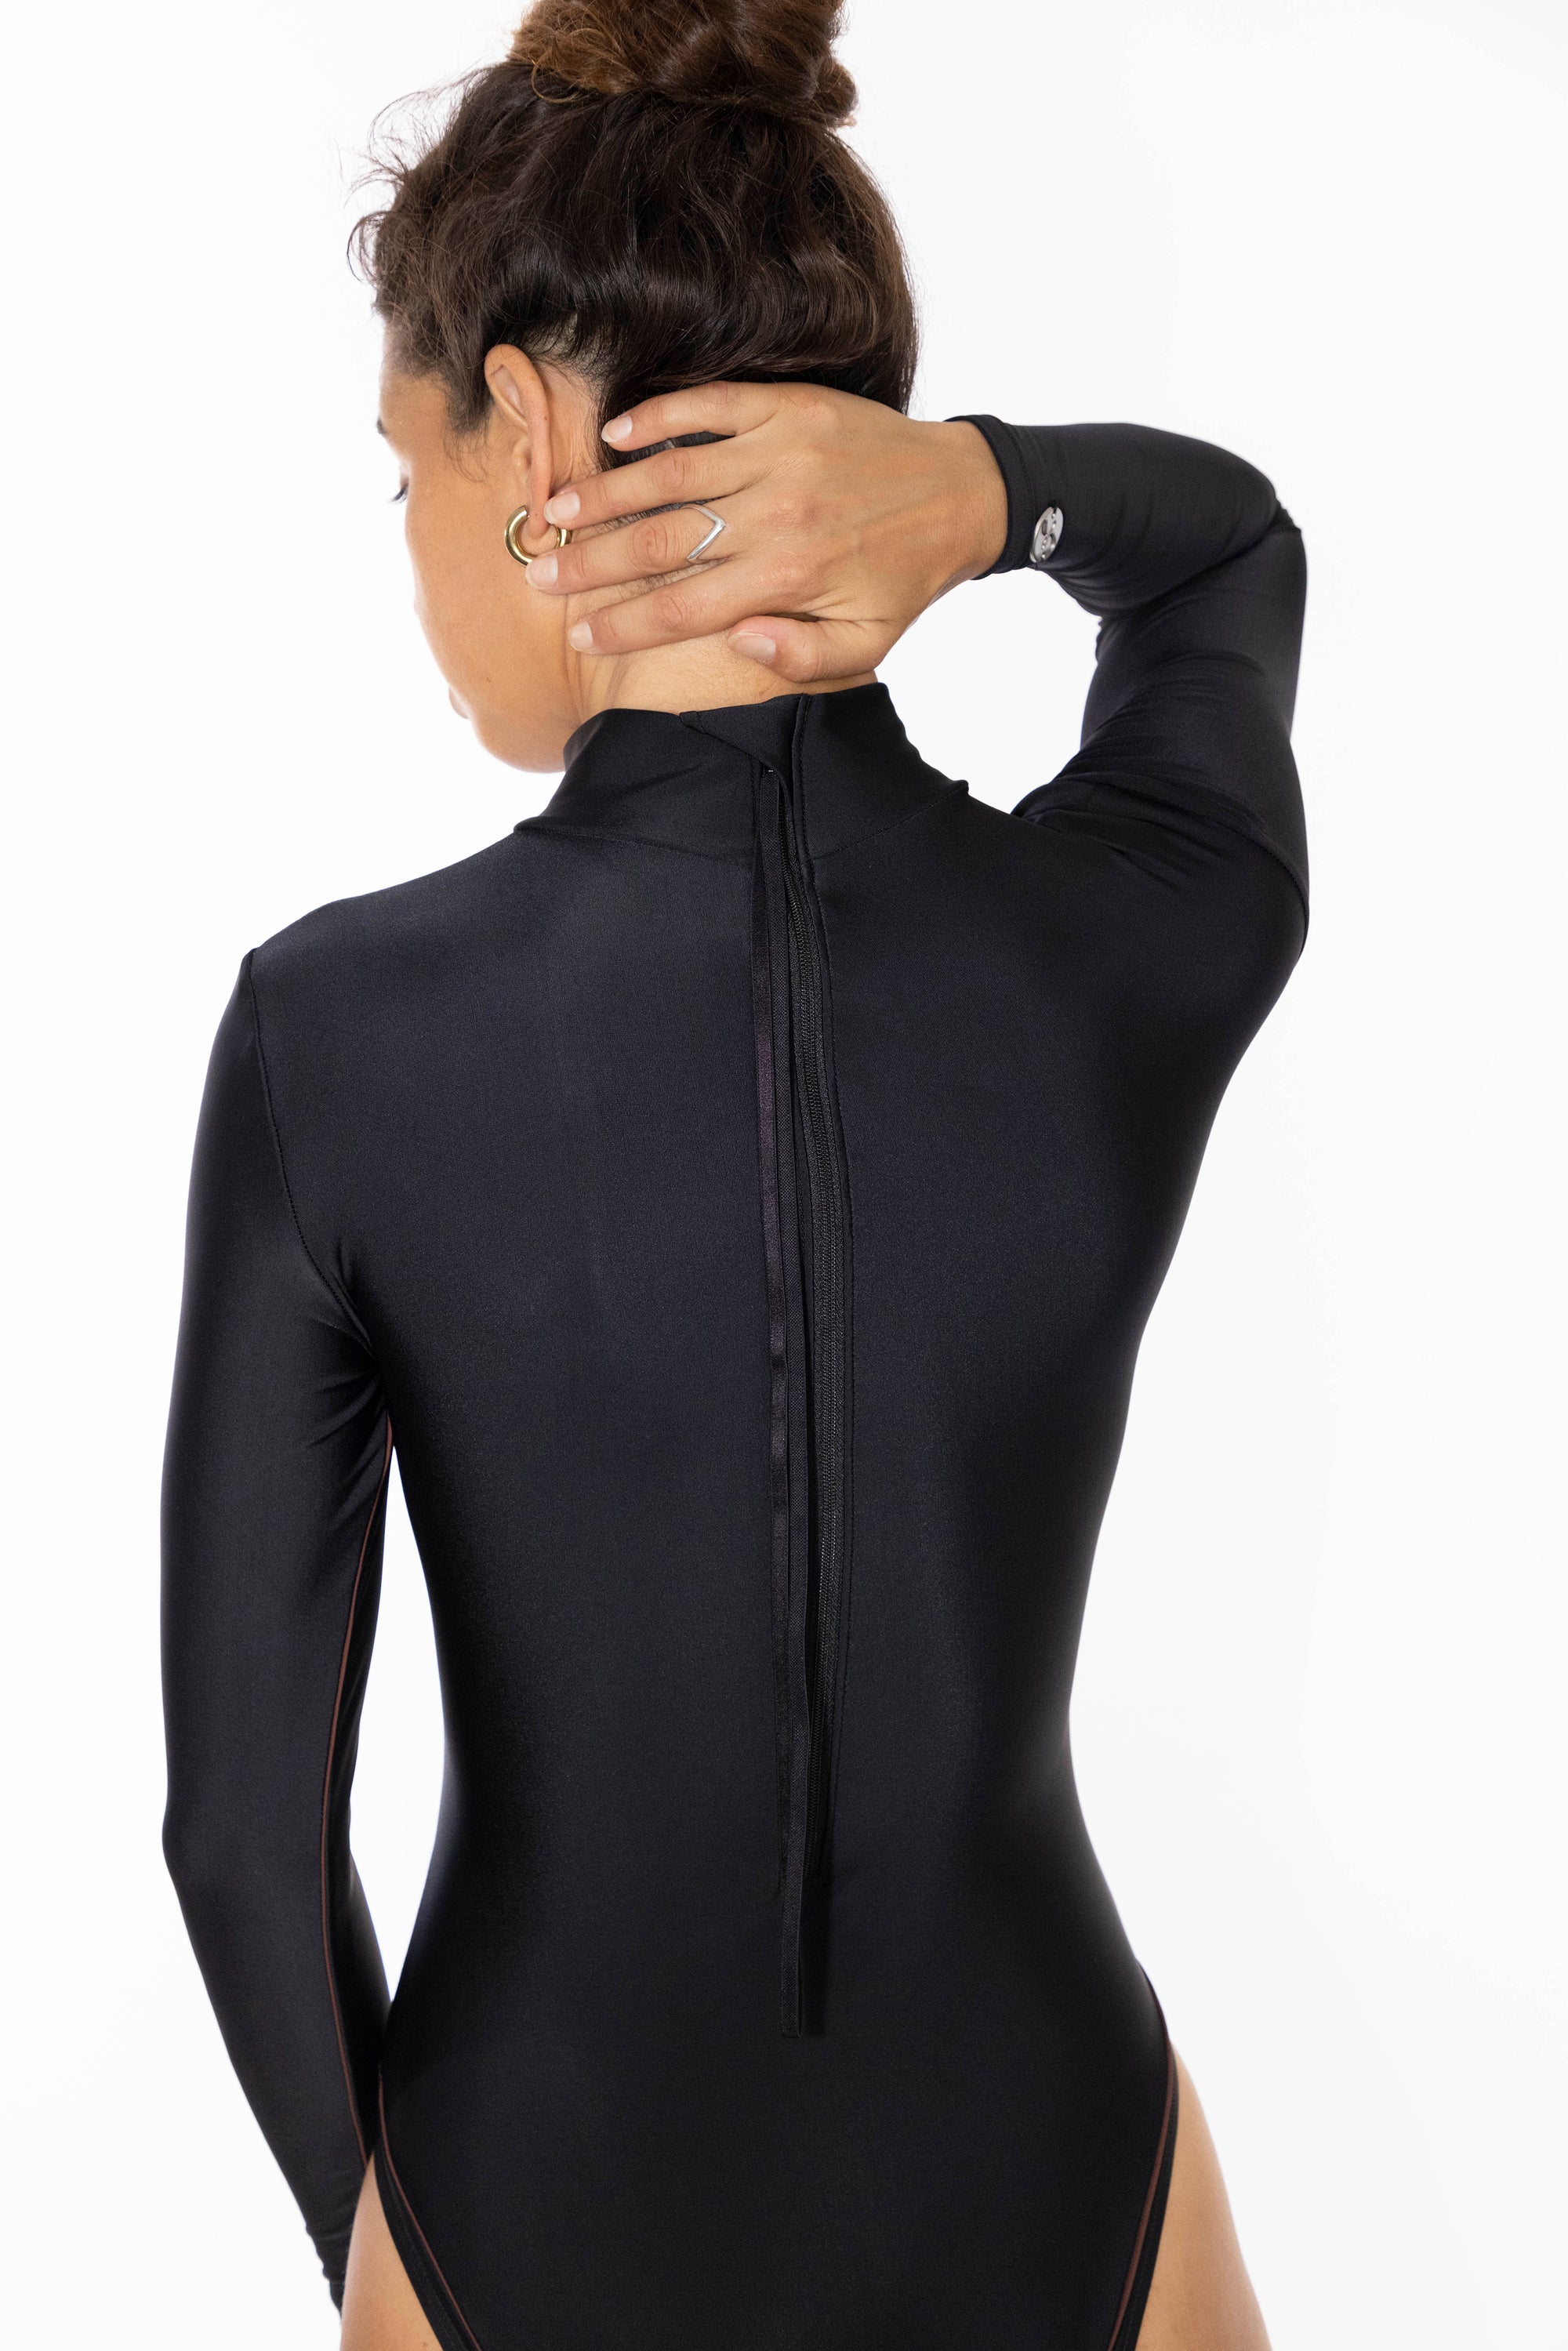 high neck black surf suit lore of the sea